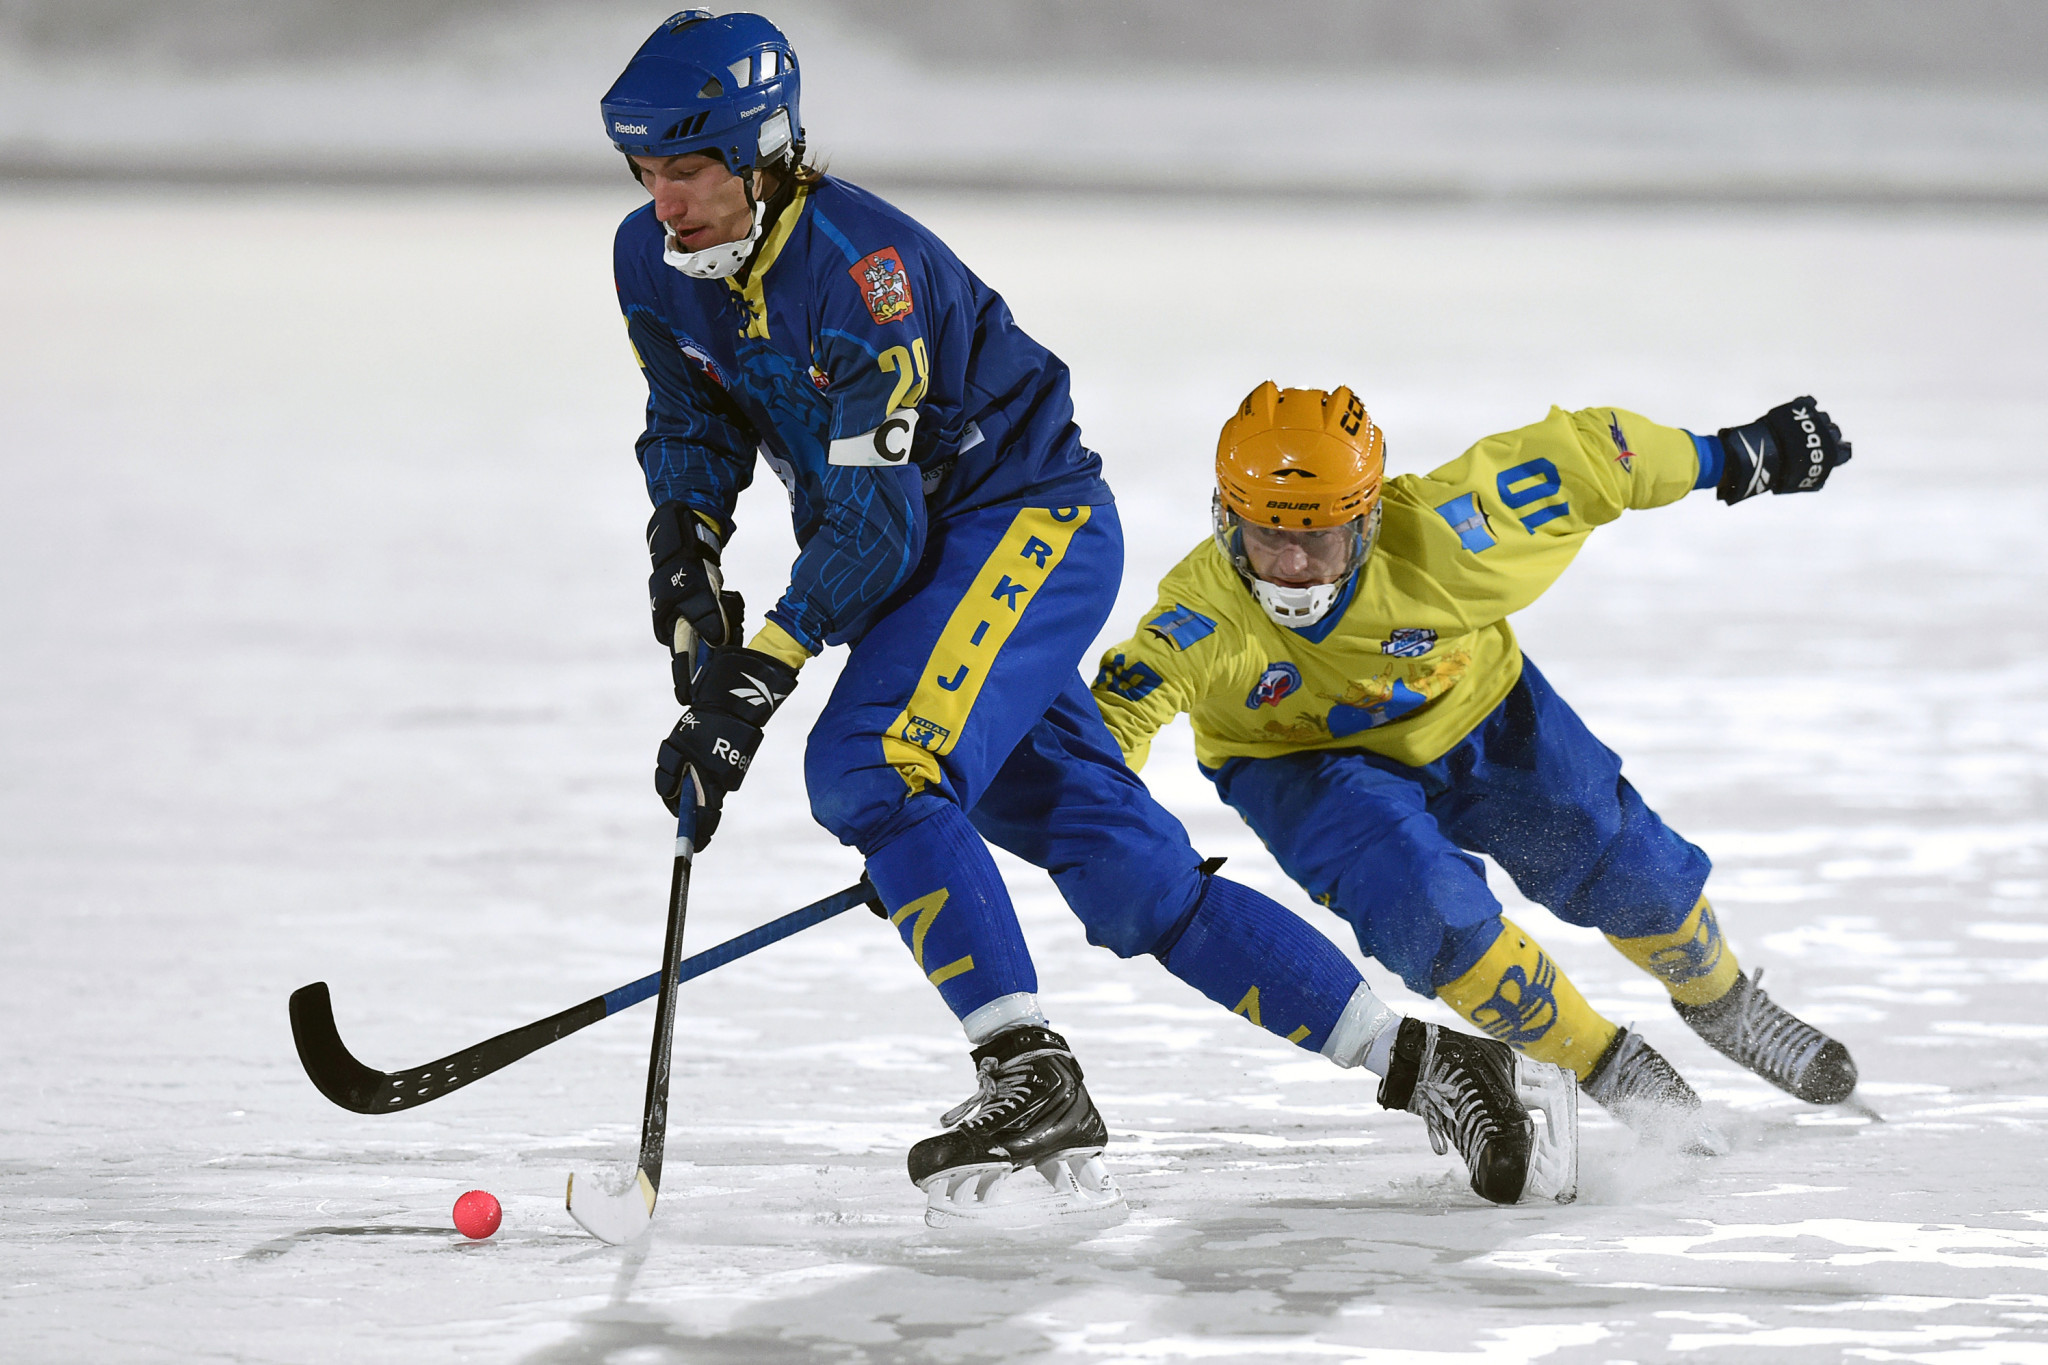 Russian bandy players are absent from the World Championships due to the nation's involvement in the war in Ukraine ©Getty Images